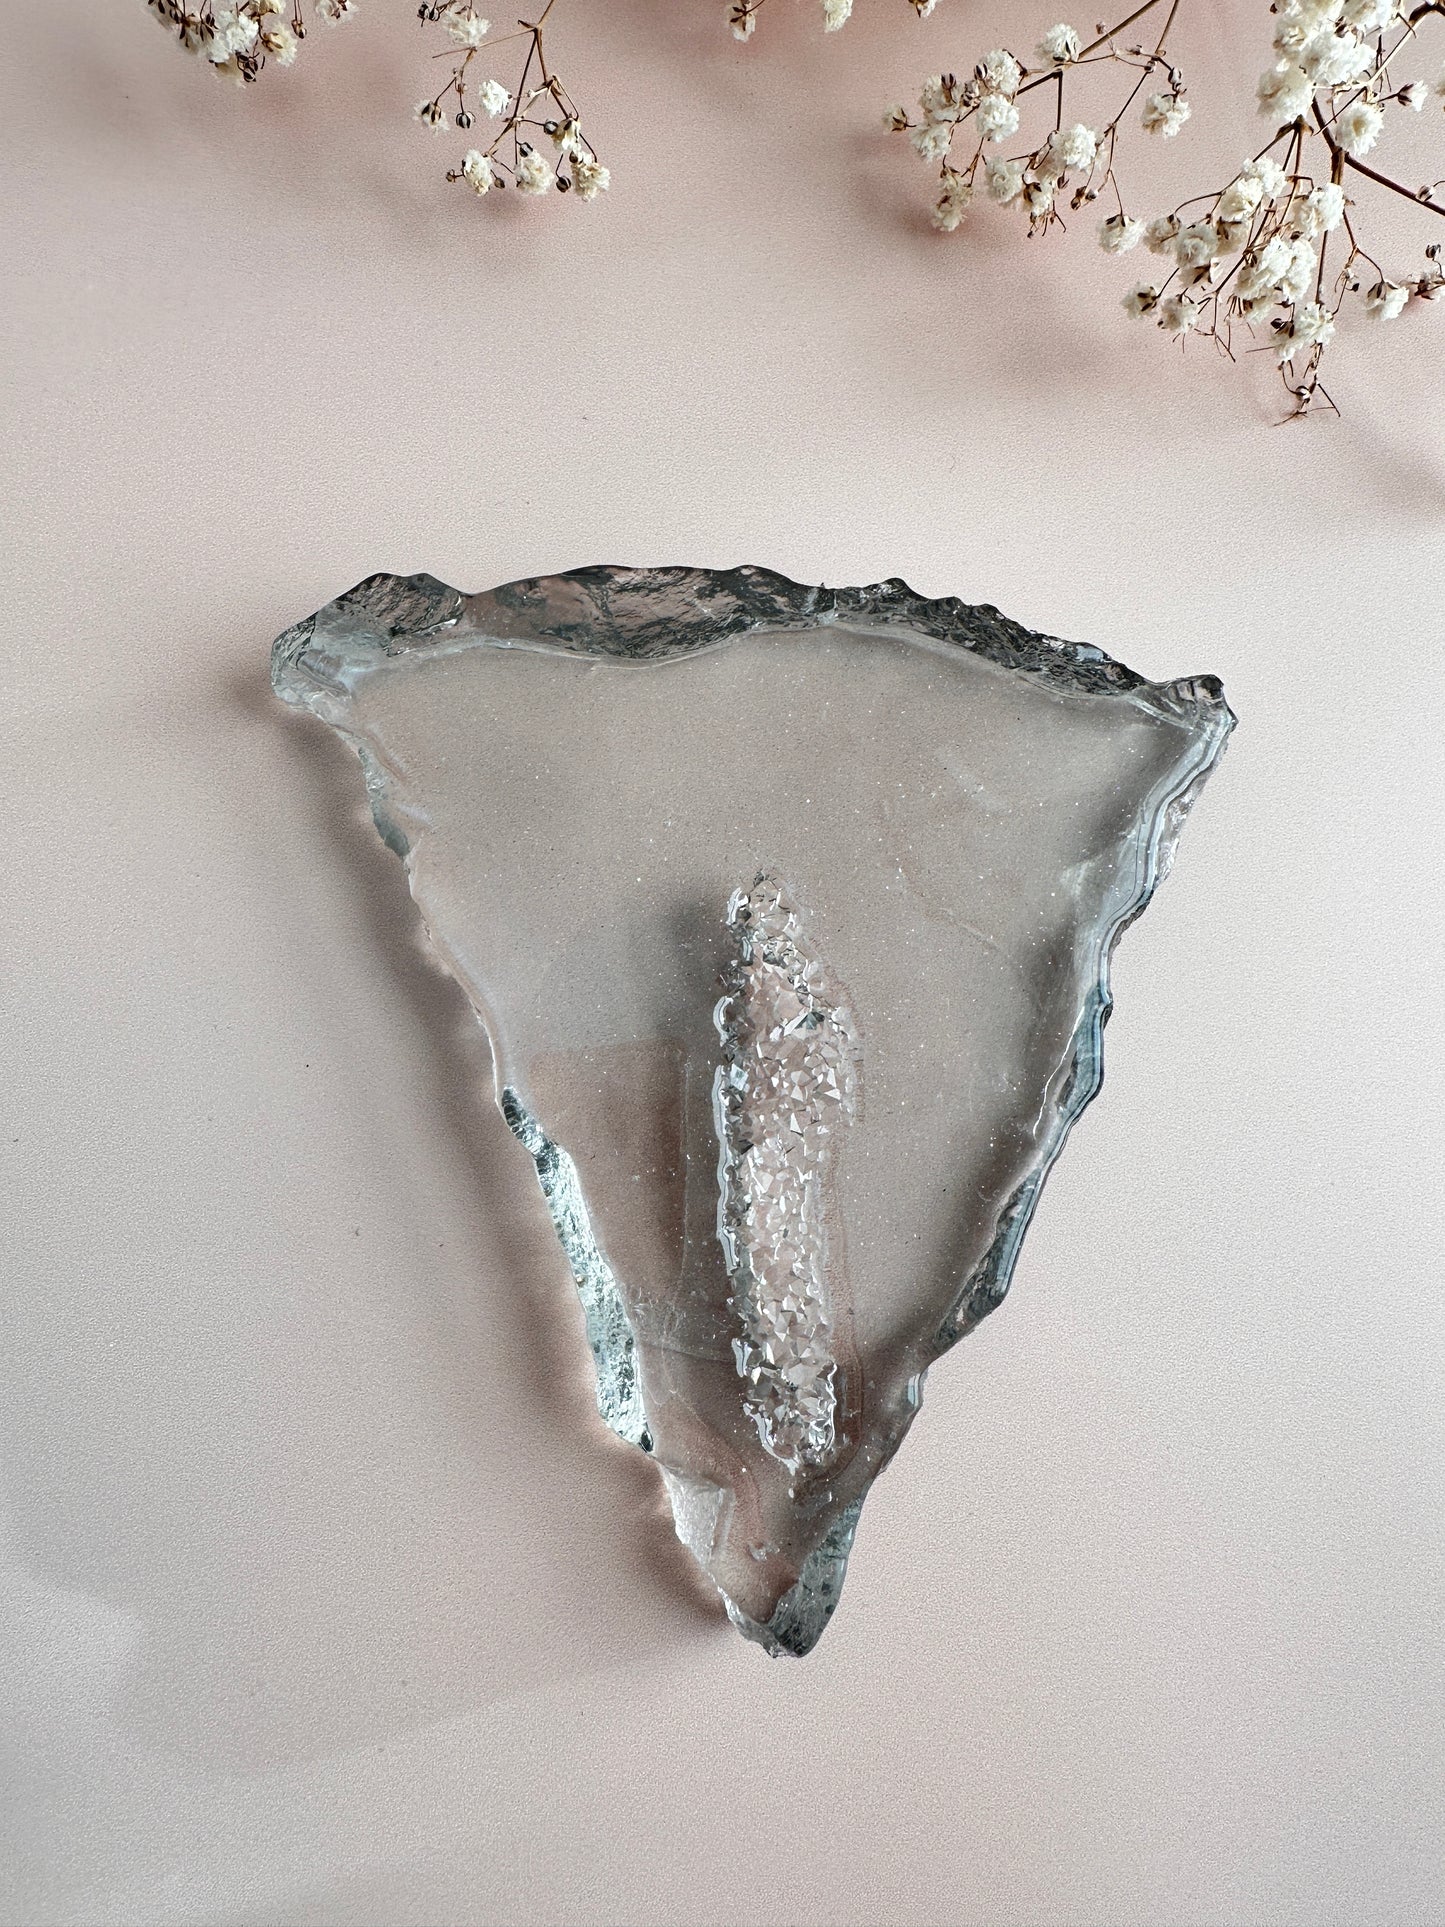 Unique Silicone Mold for Resin with Edges of Broken Stone and Geode Crystal Effect